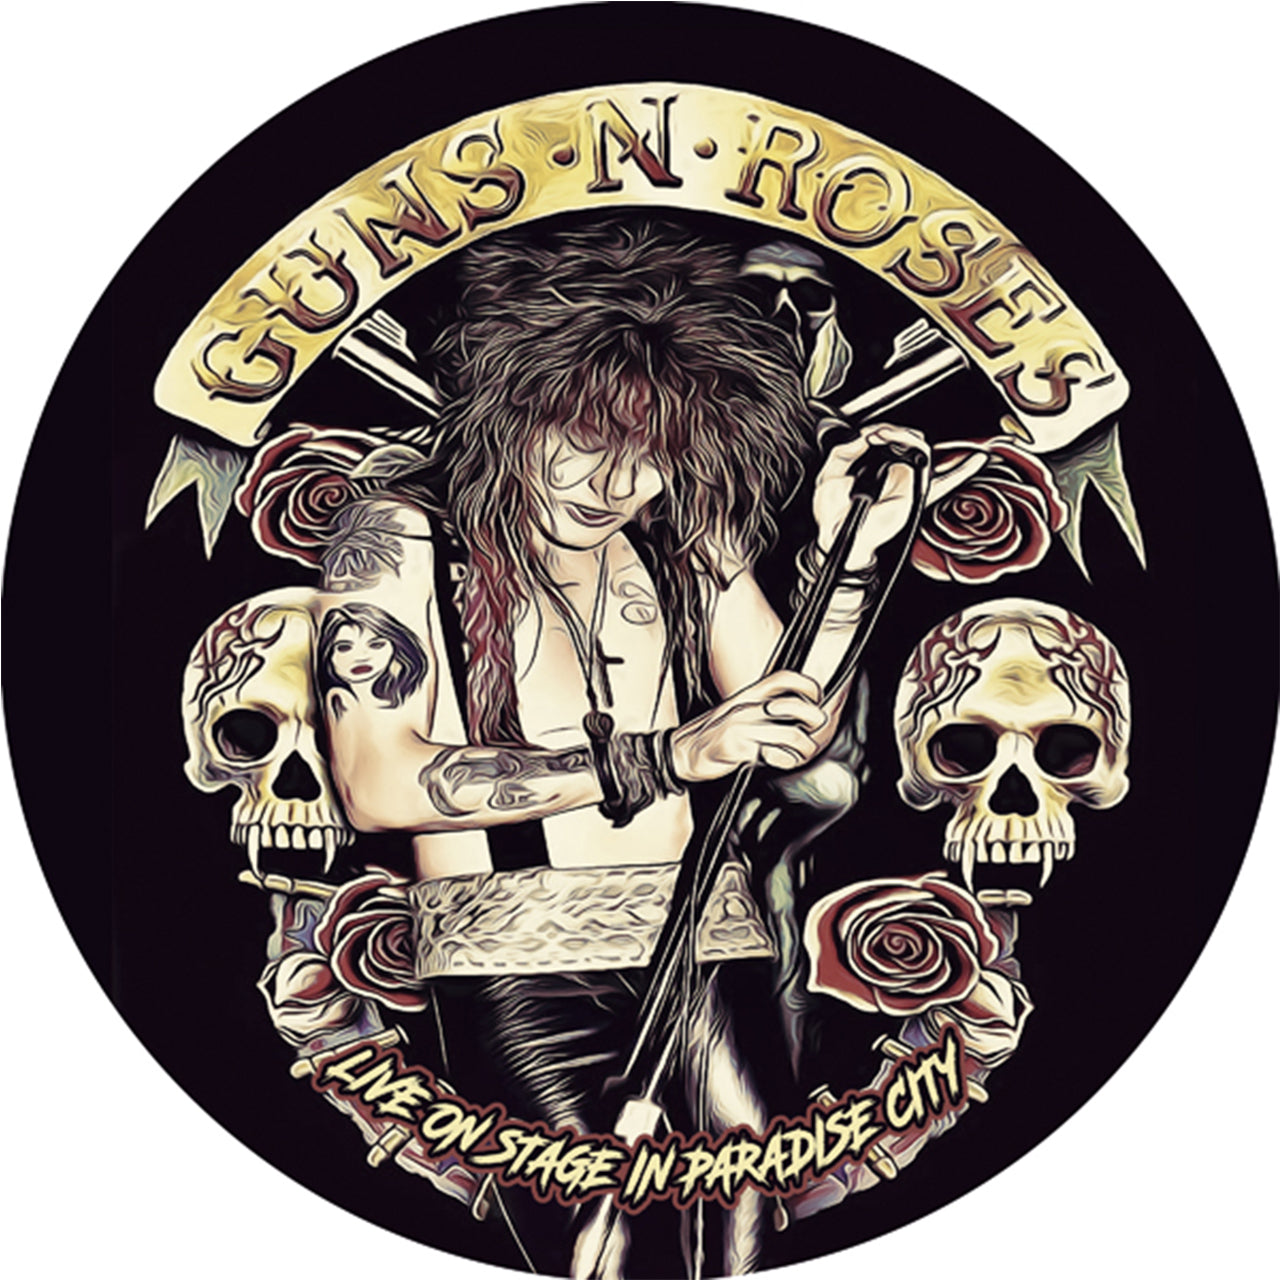 GUNS N' ROSES - Live On Stage In Paradise City (1988-1992) - LP - 180g Picture Disc Vinyl [JUN 16]